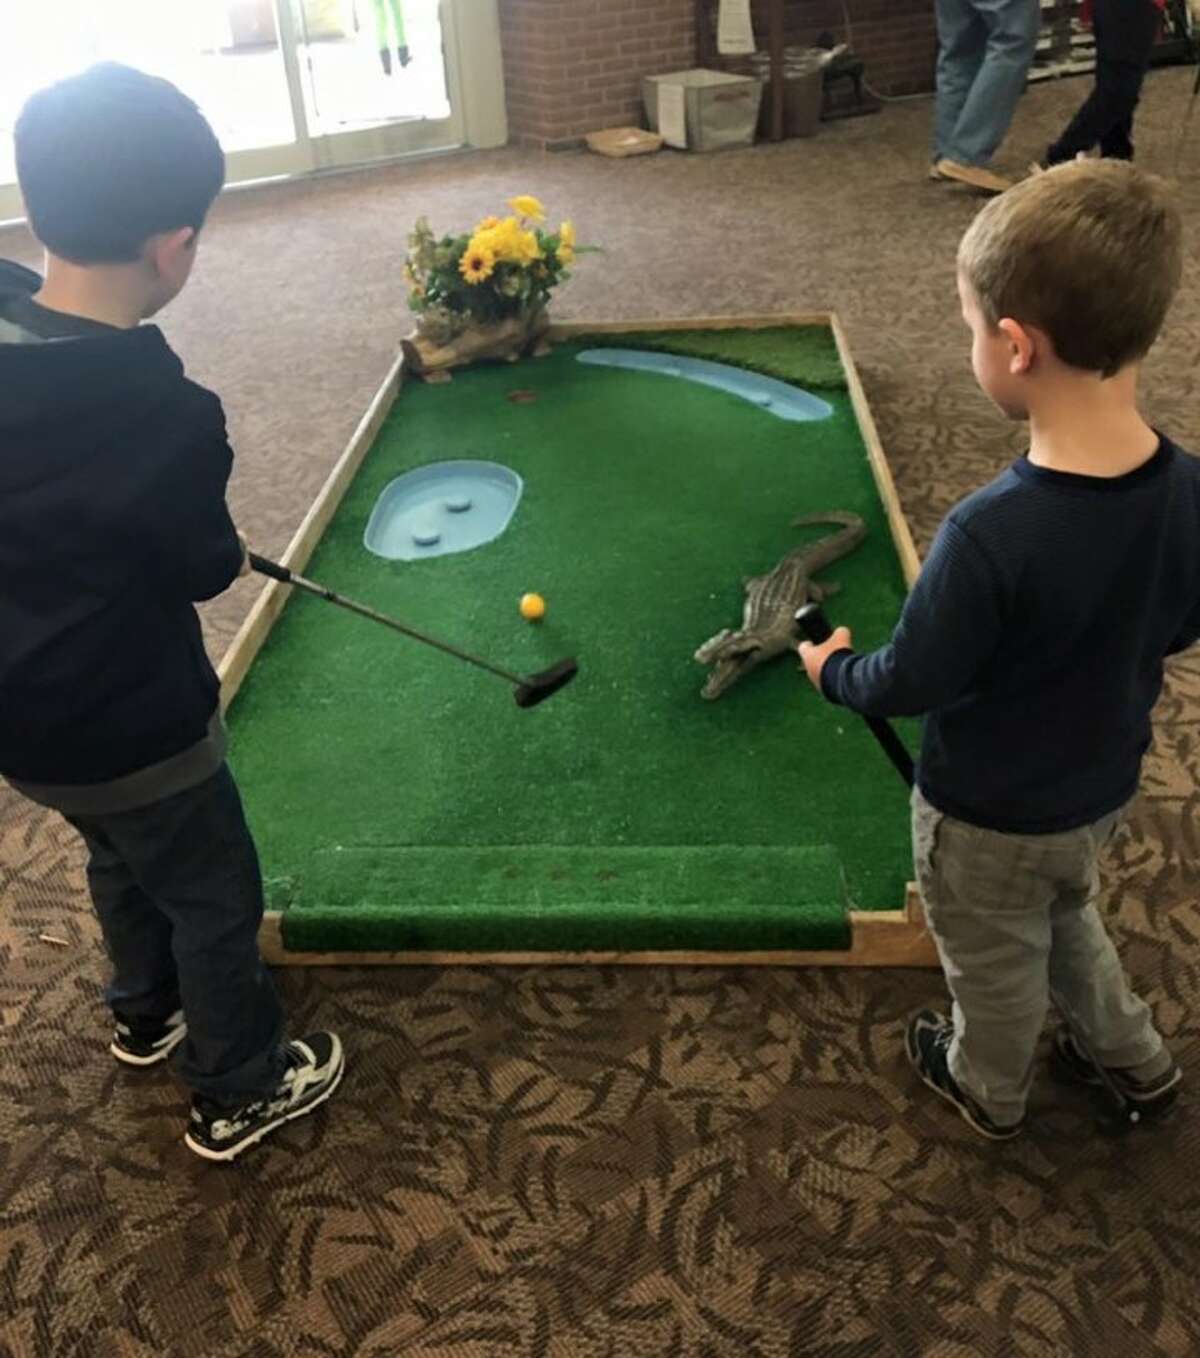 After studying the course, two sons of IMPACTrumbull prepare to put at one of the 18 holes that were set up at the Trumbull Library Monday afternoon.